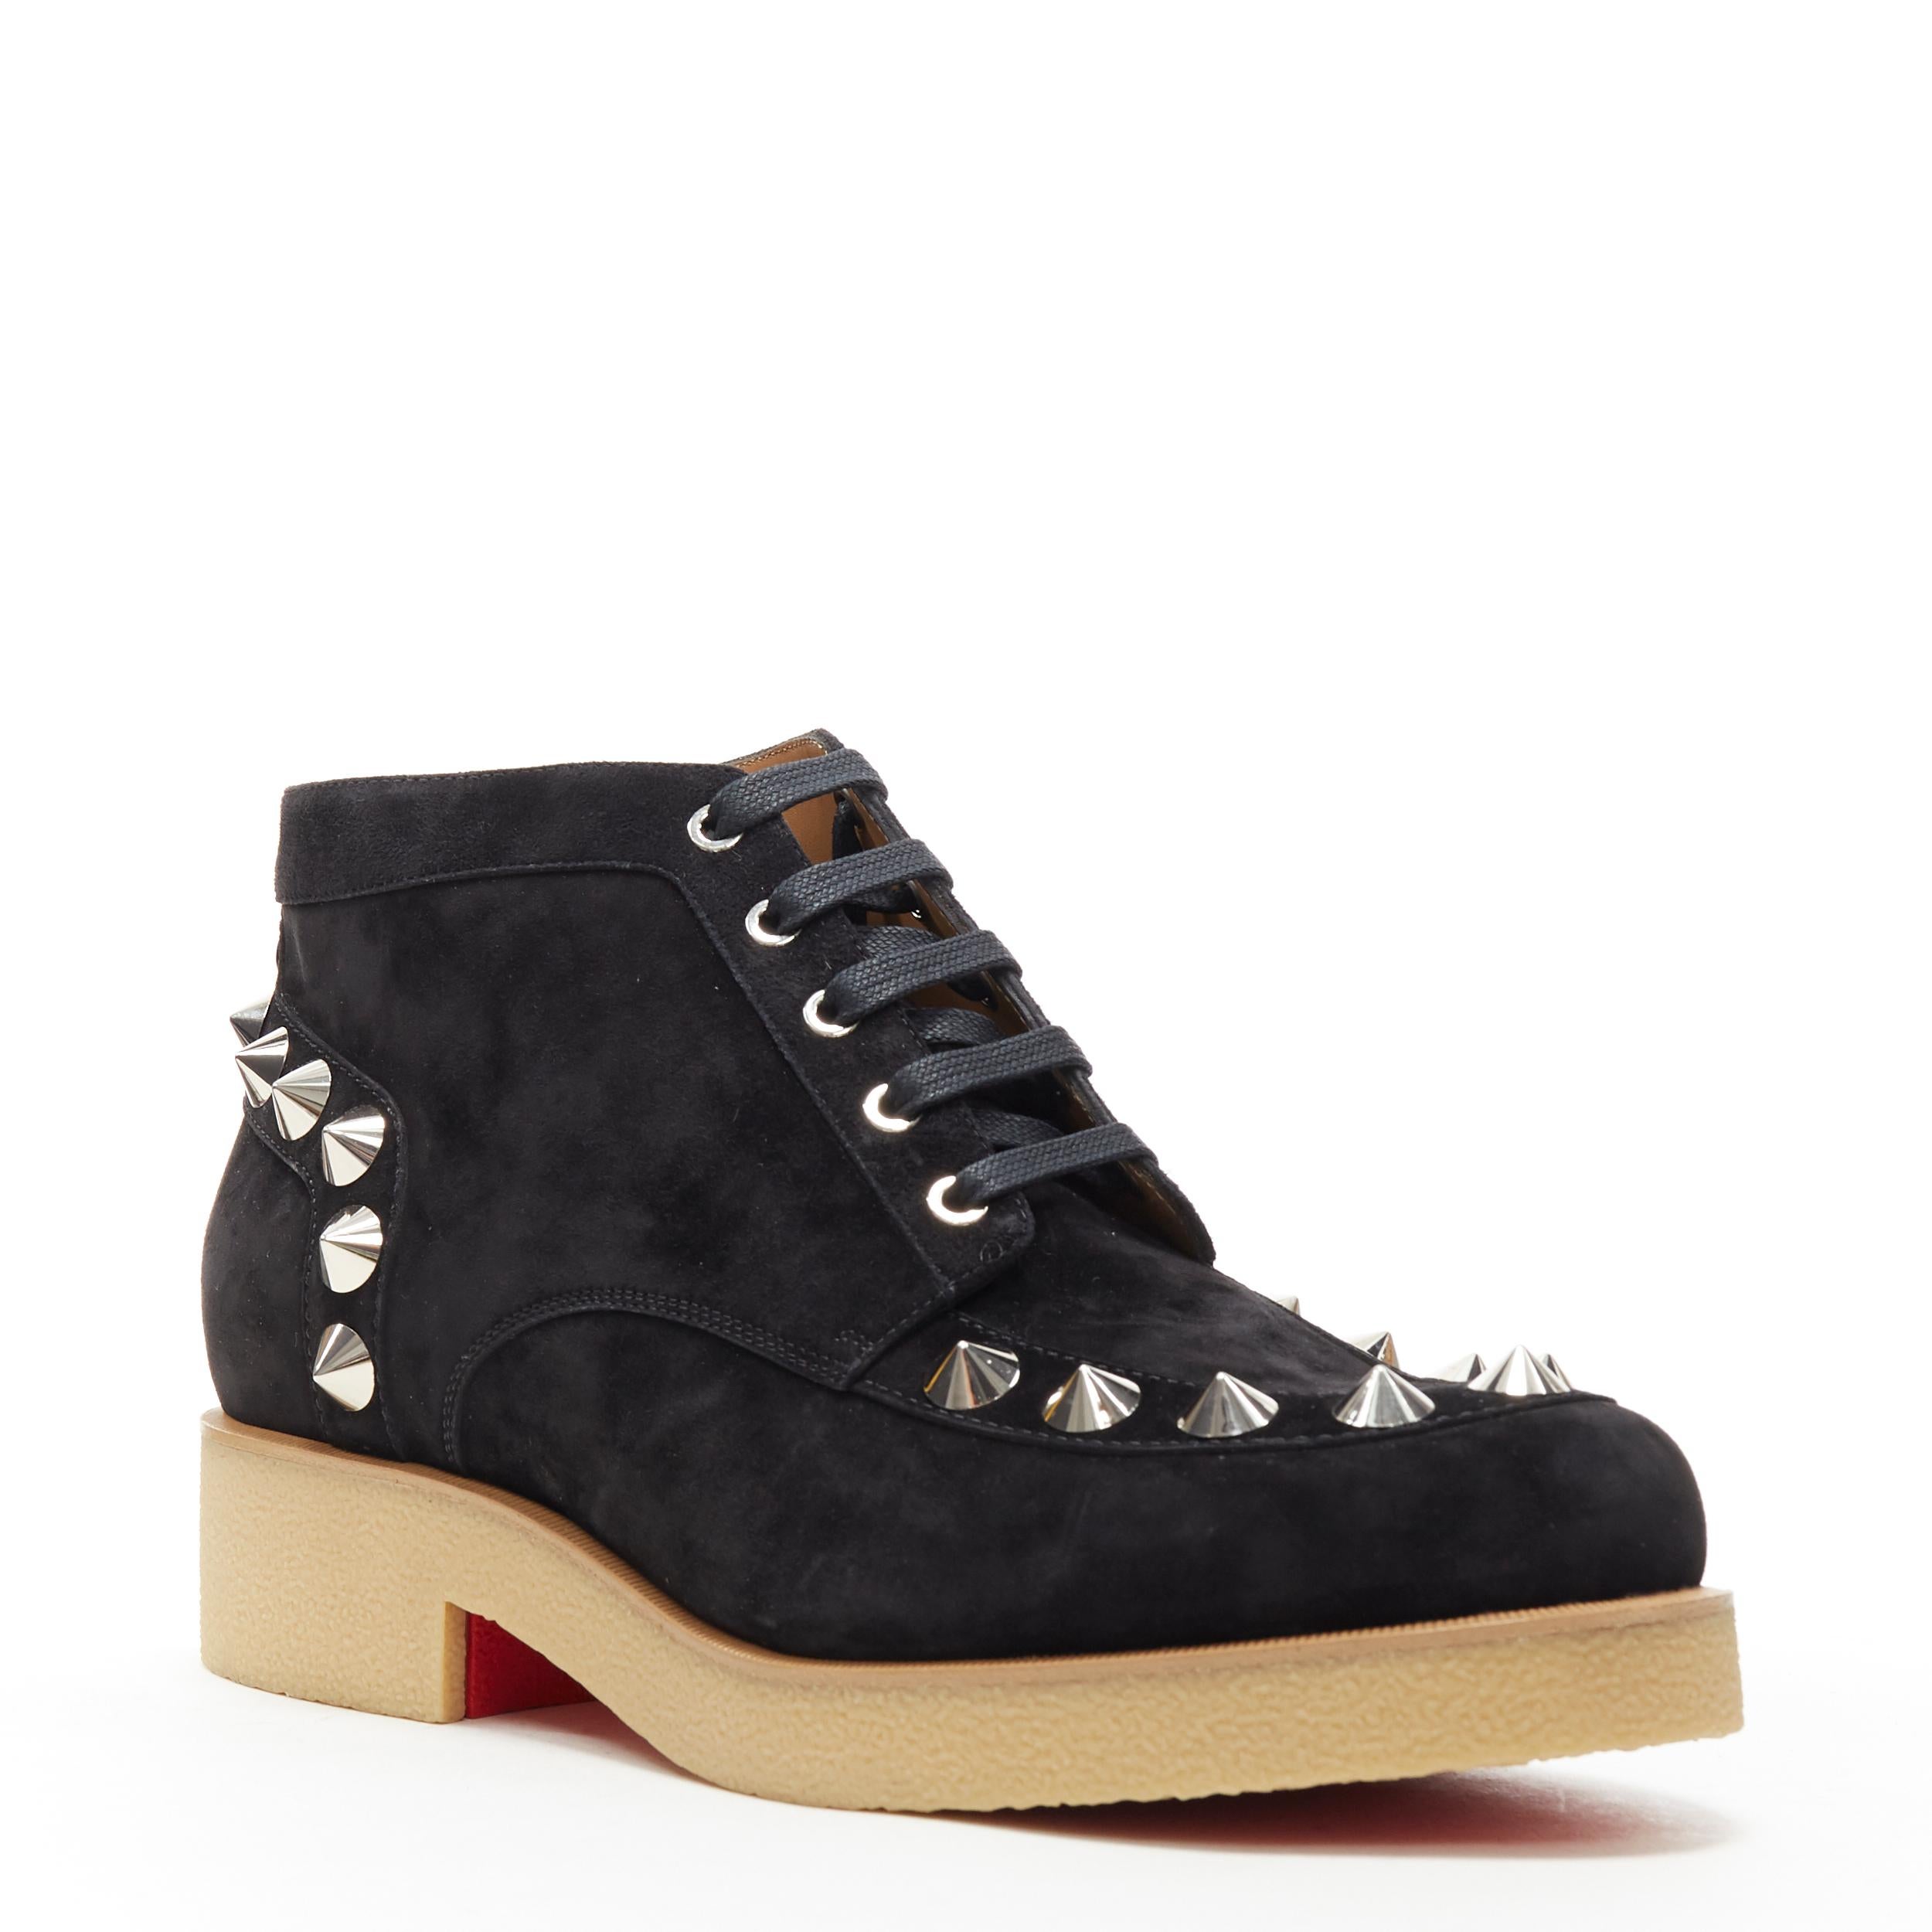 new CHRISTIAN LOUBOUTIN Yannick Flat black suede spike stud creeper boots EU42
Brand: Christian Louboutin
Designer: Christian Louboutin
Collection: AW18
Model Name / Style: Yannick
Material: Suede
Color: Black
Pattern: Solid
Closure: Lace up
Extra